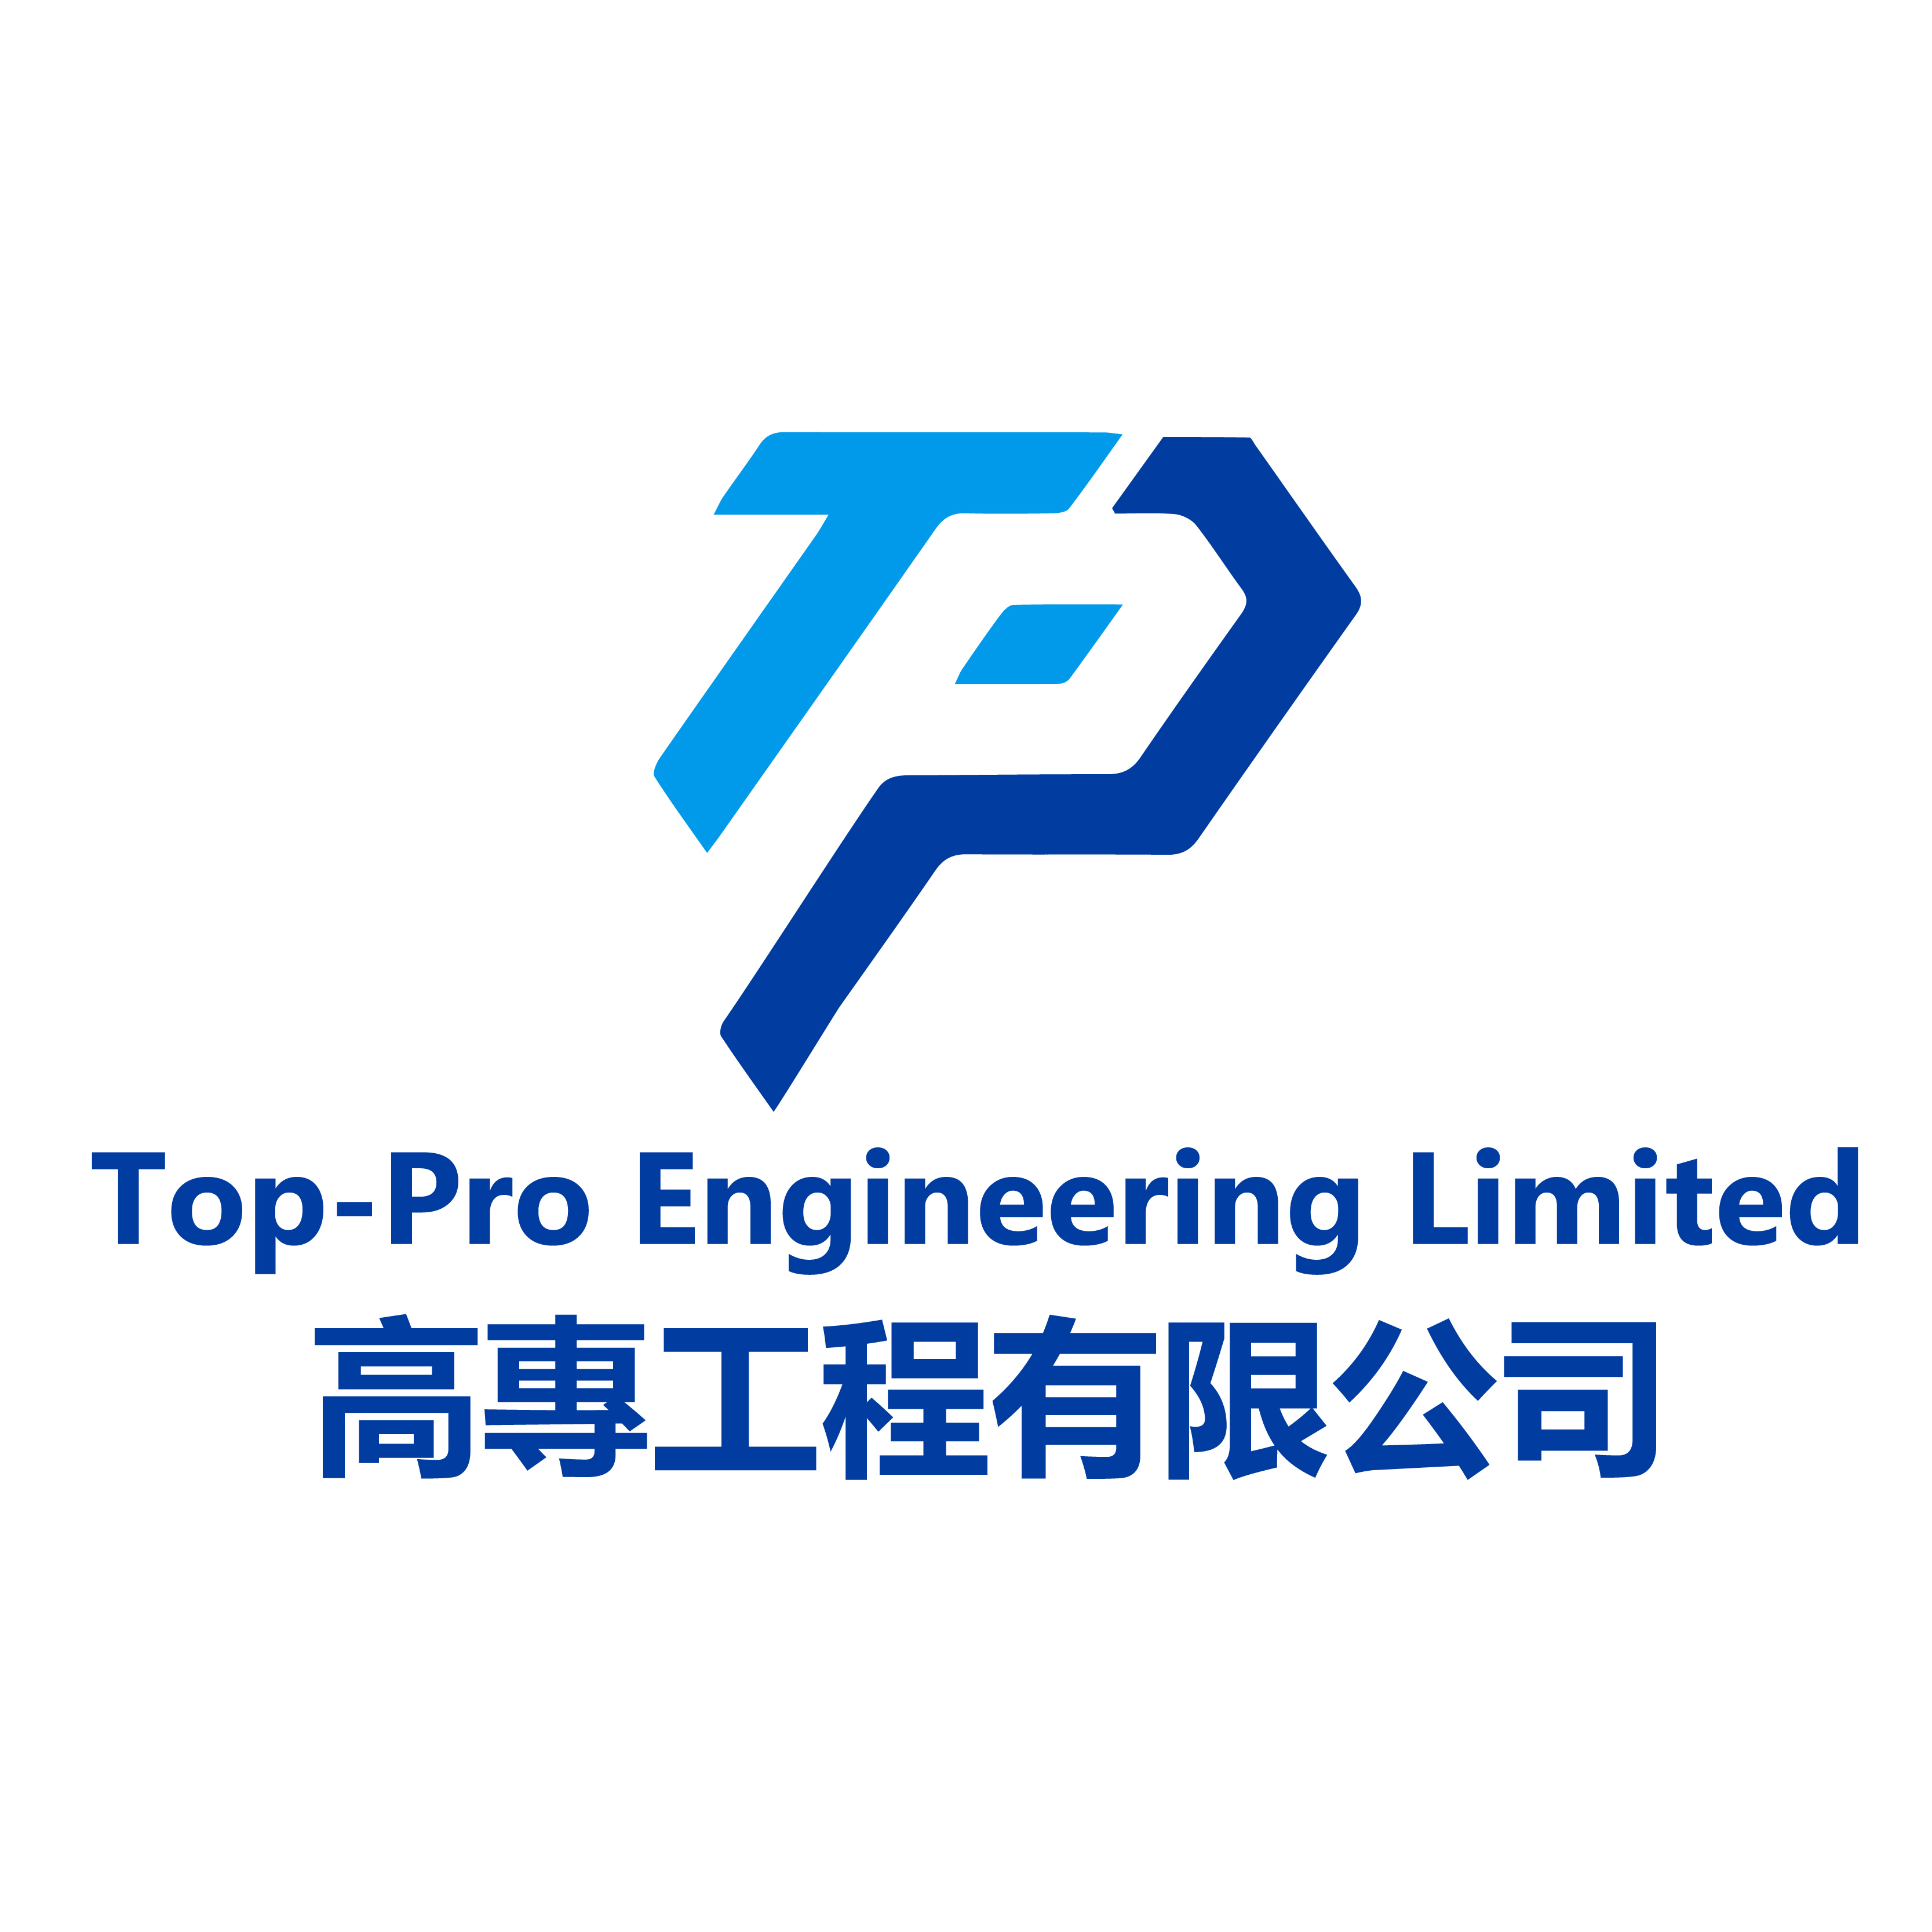 Top-Pro Engineering Limited